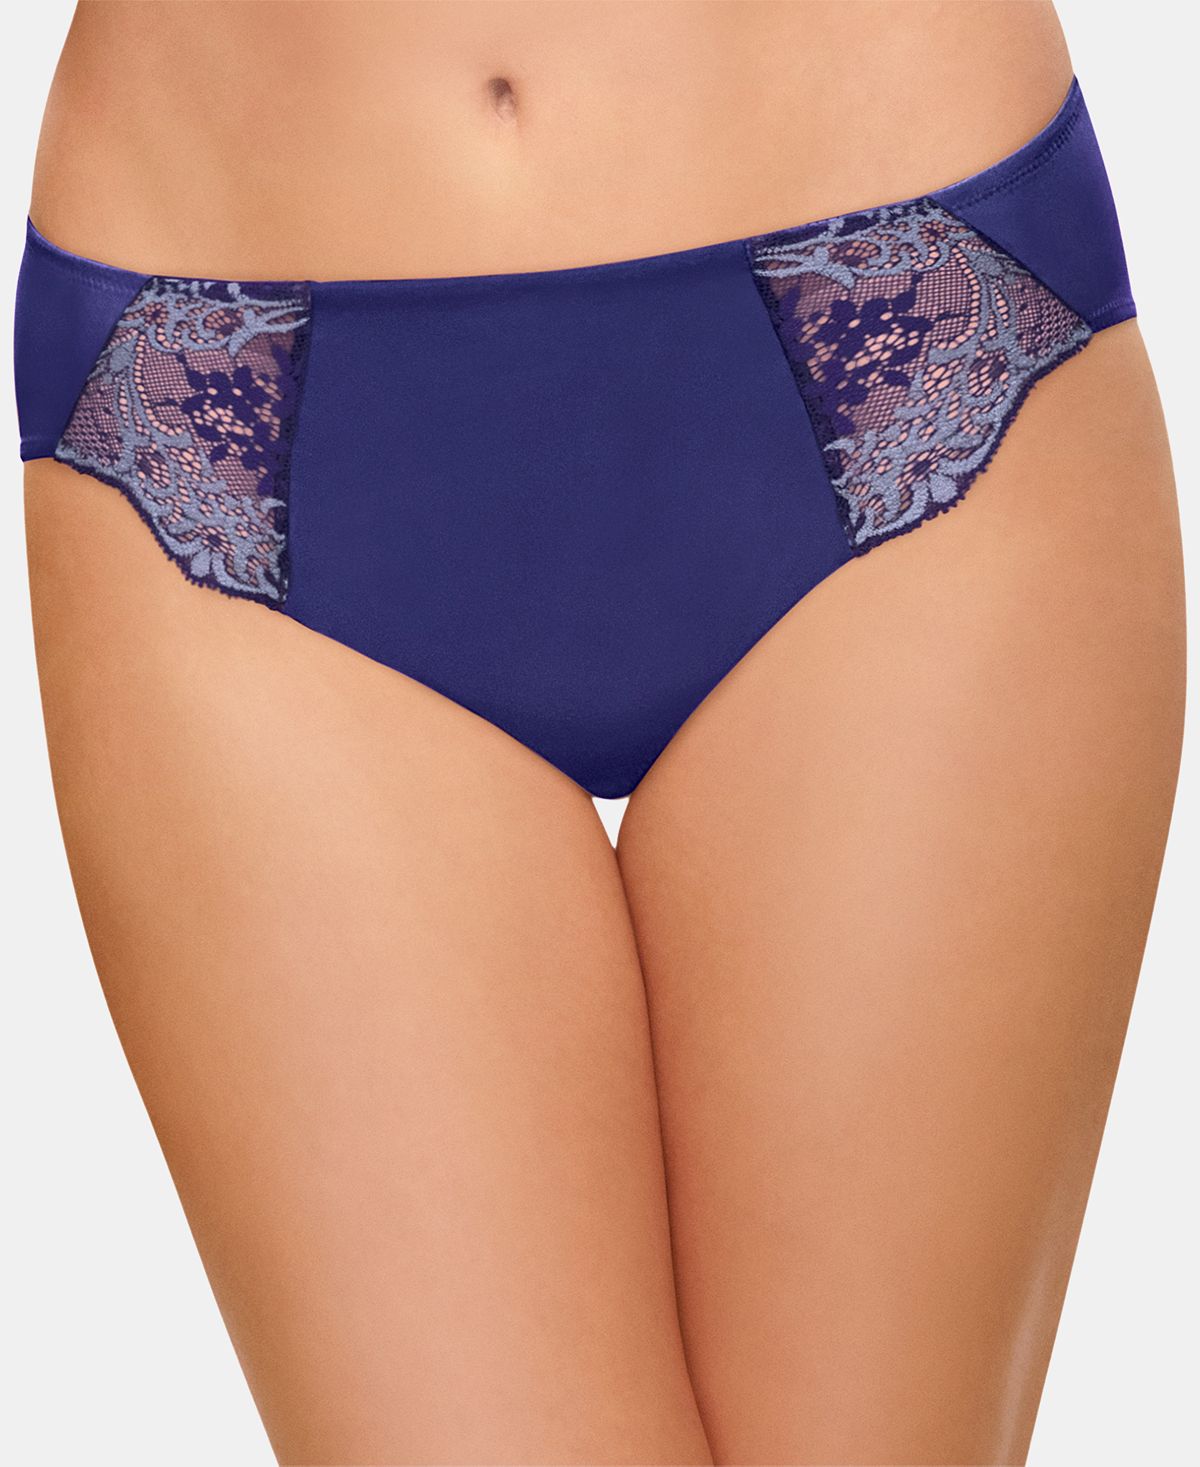 Wacoal Lace Impression Sheer Lace Brief 841257 Patriot Blue